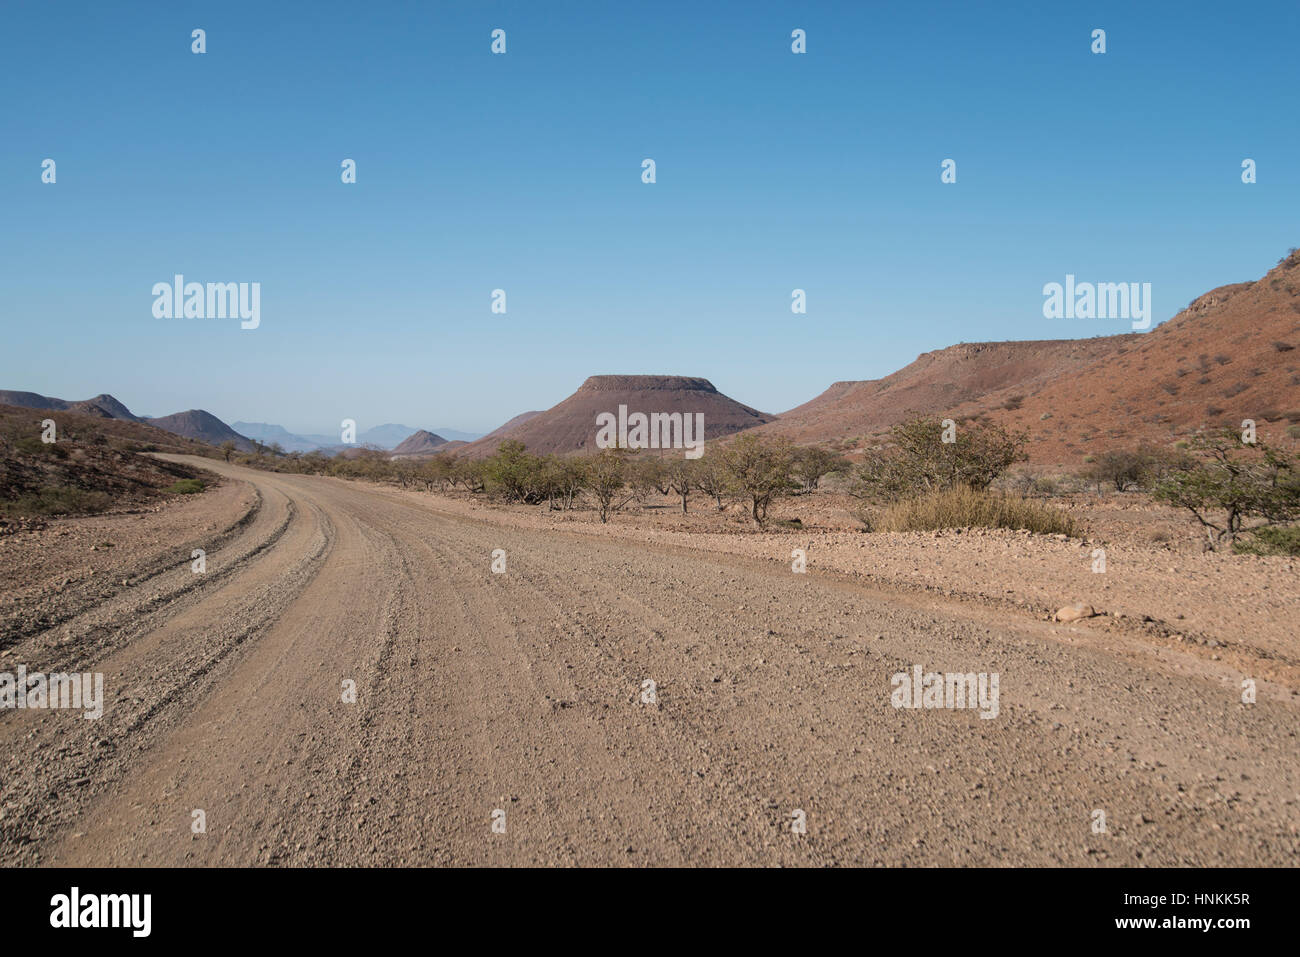 Typical gravel road, Namibia, Africa Stock Photo